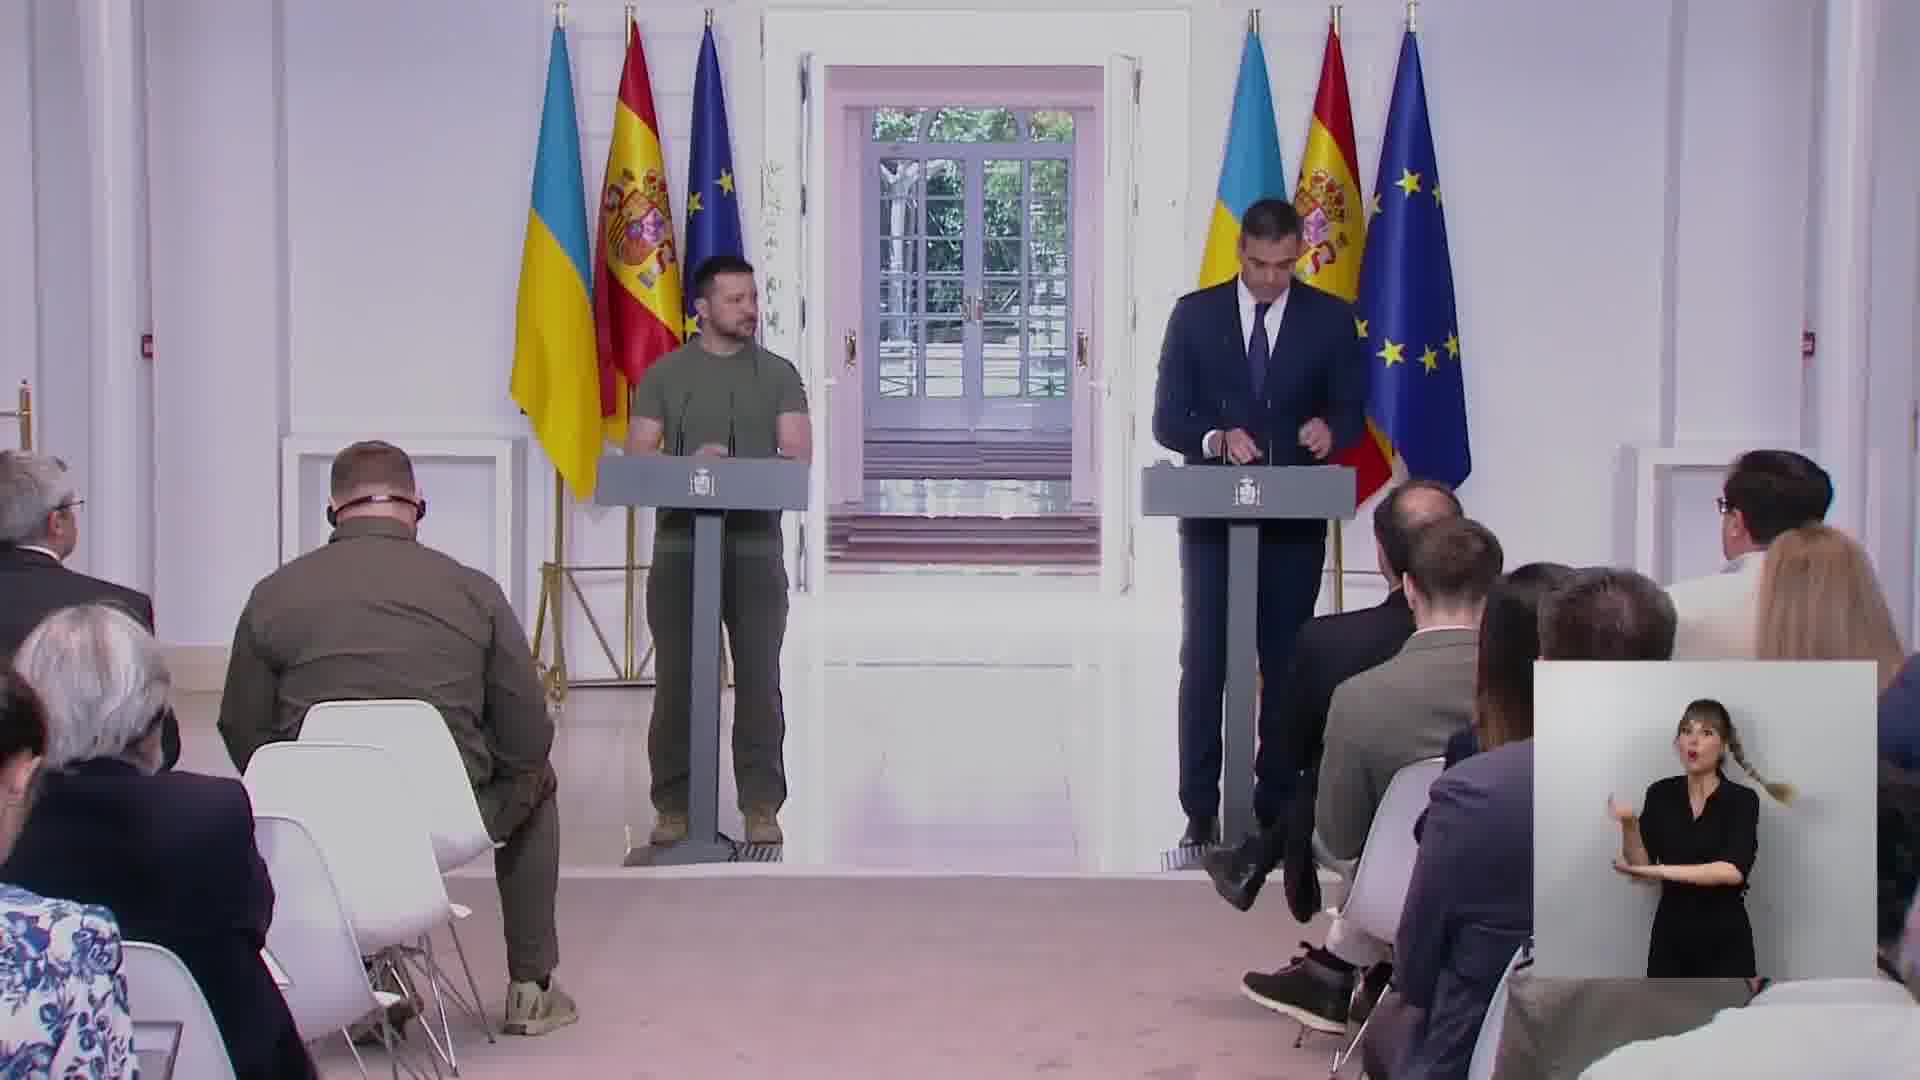 Sánchez confirms Spain's firm commitment to Ukraine and highlights several areas: Ukraine will be provided with instruments for its defense. Humanitarian, financial support, reconstruction aid. Military commitment of one billion euros to strengthen its capabilities